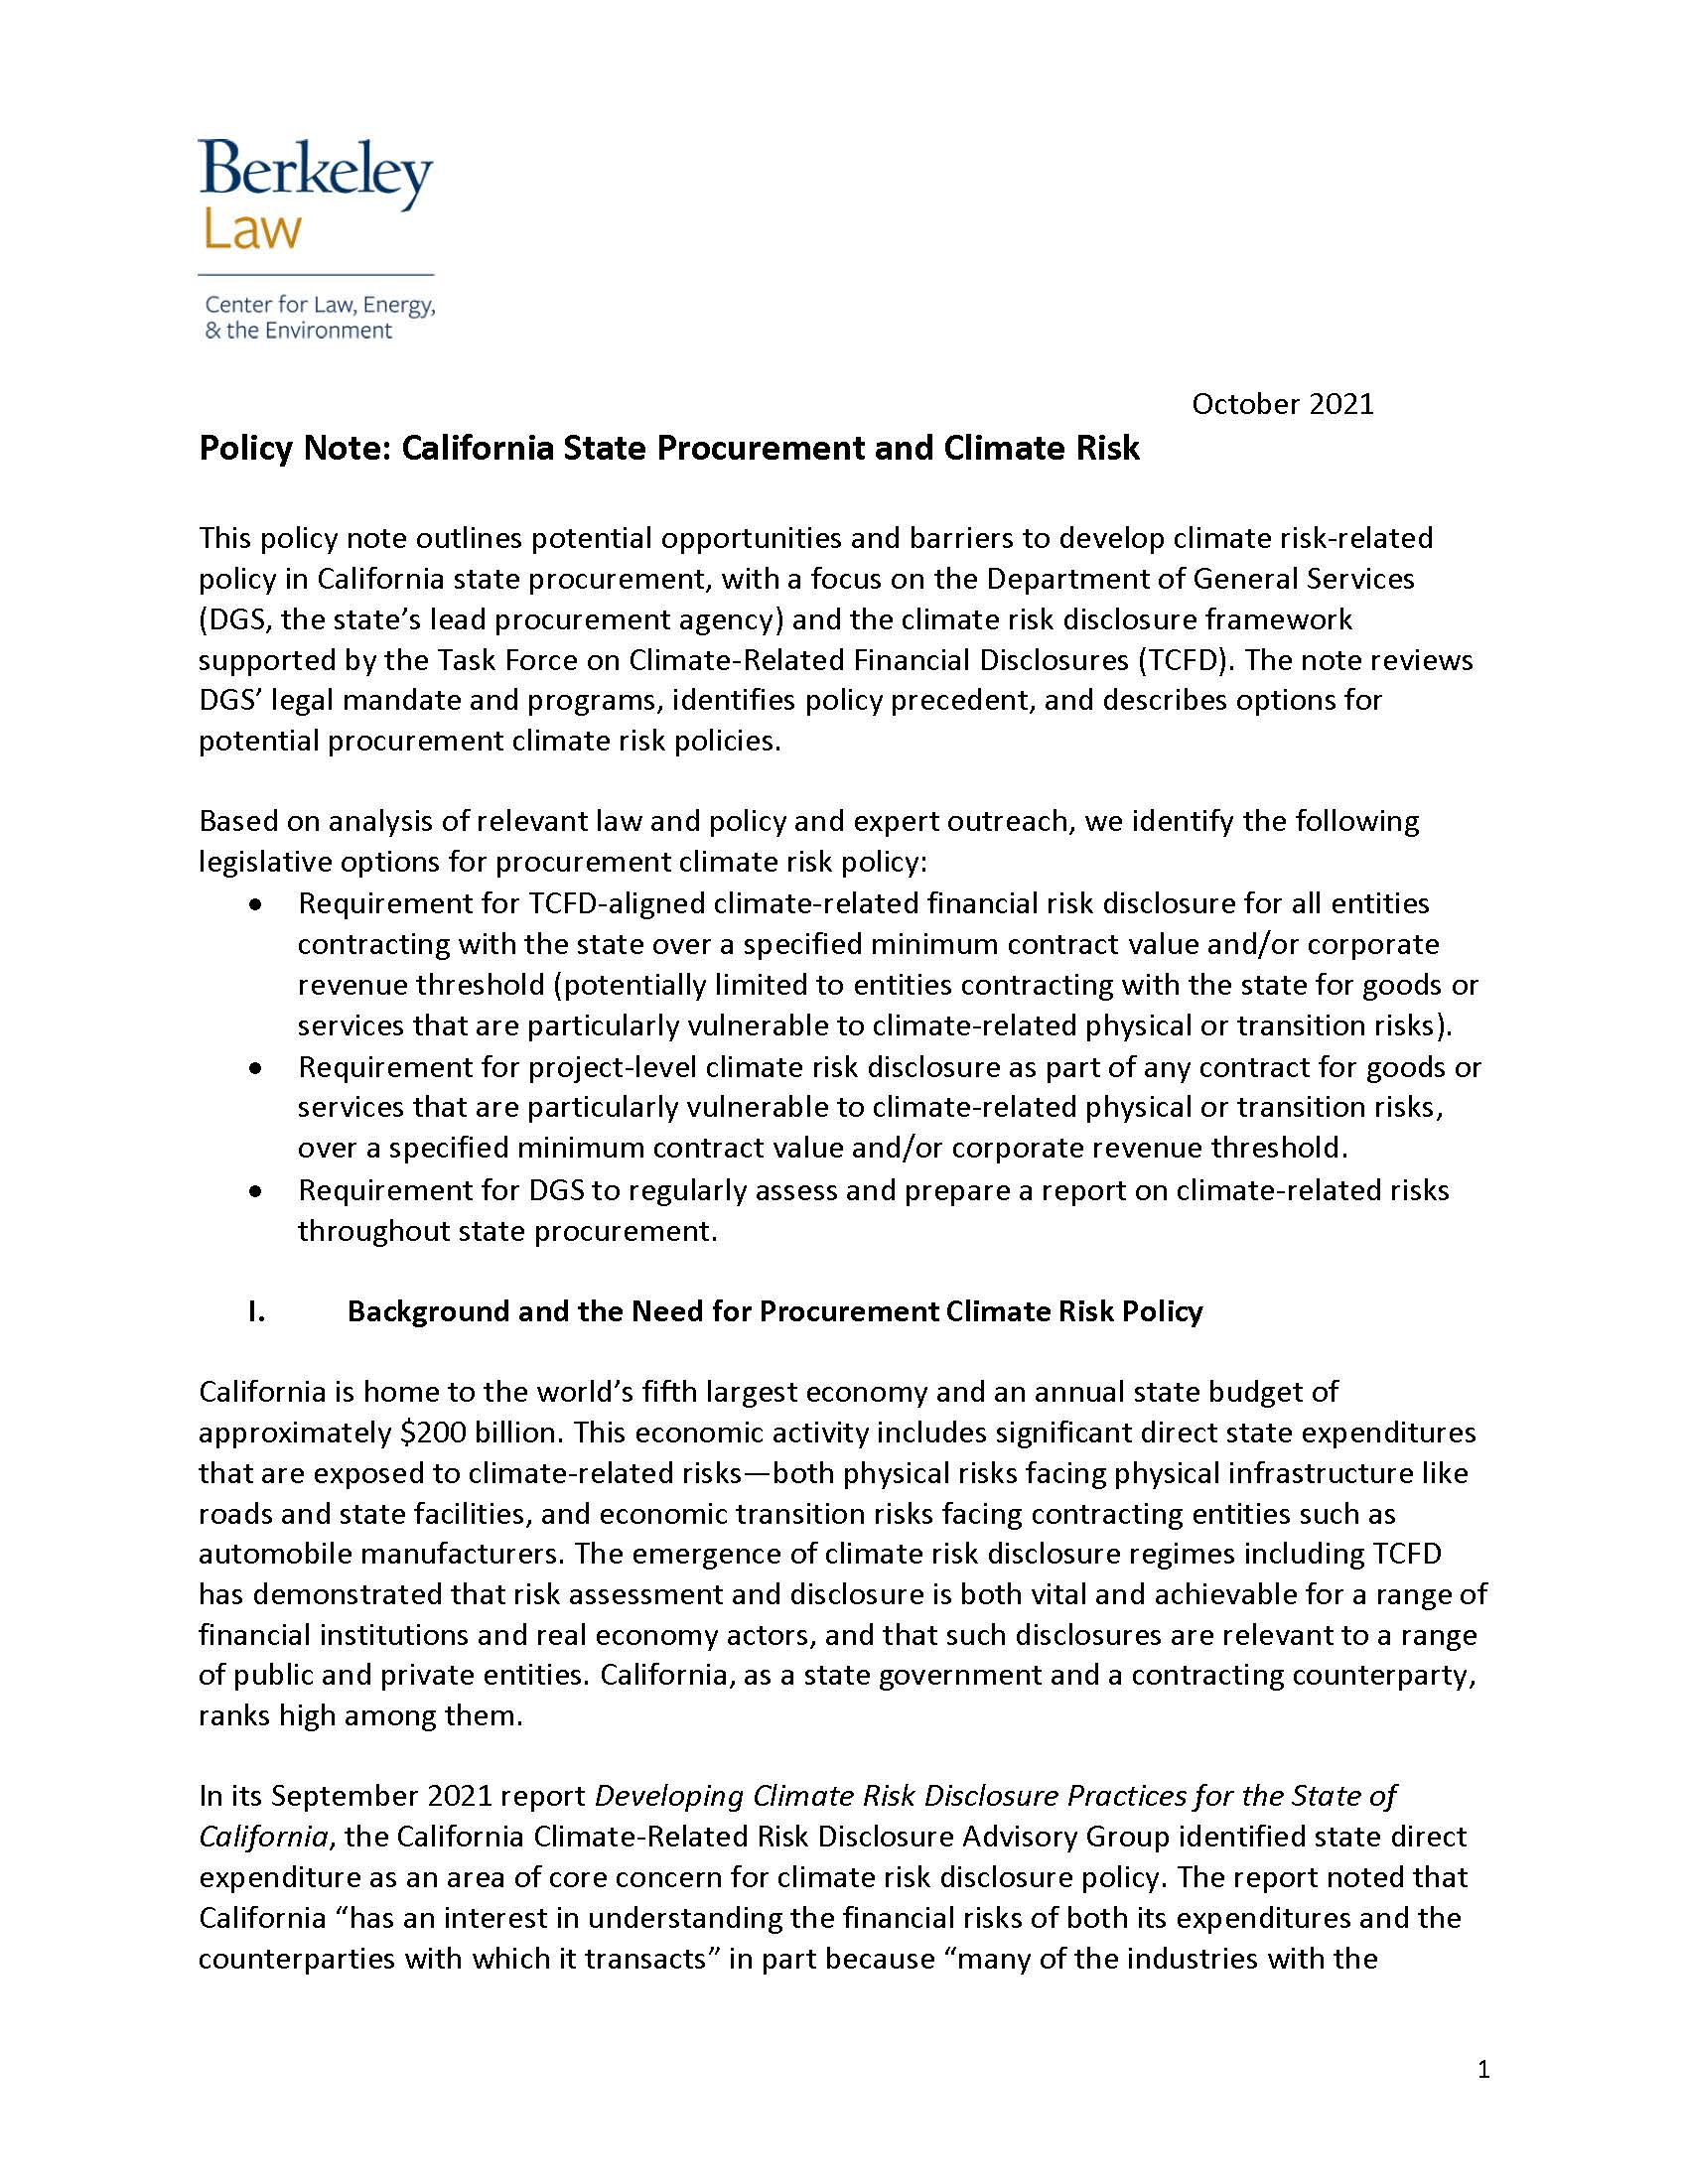 View Developing Climate Risk Policy for State Procurement and Bond Issuance